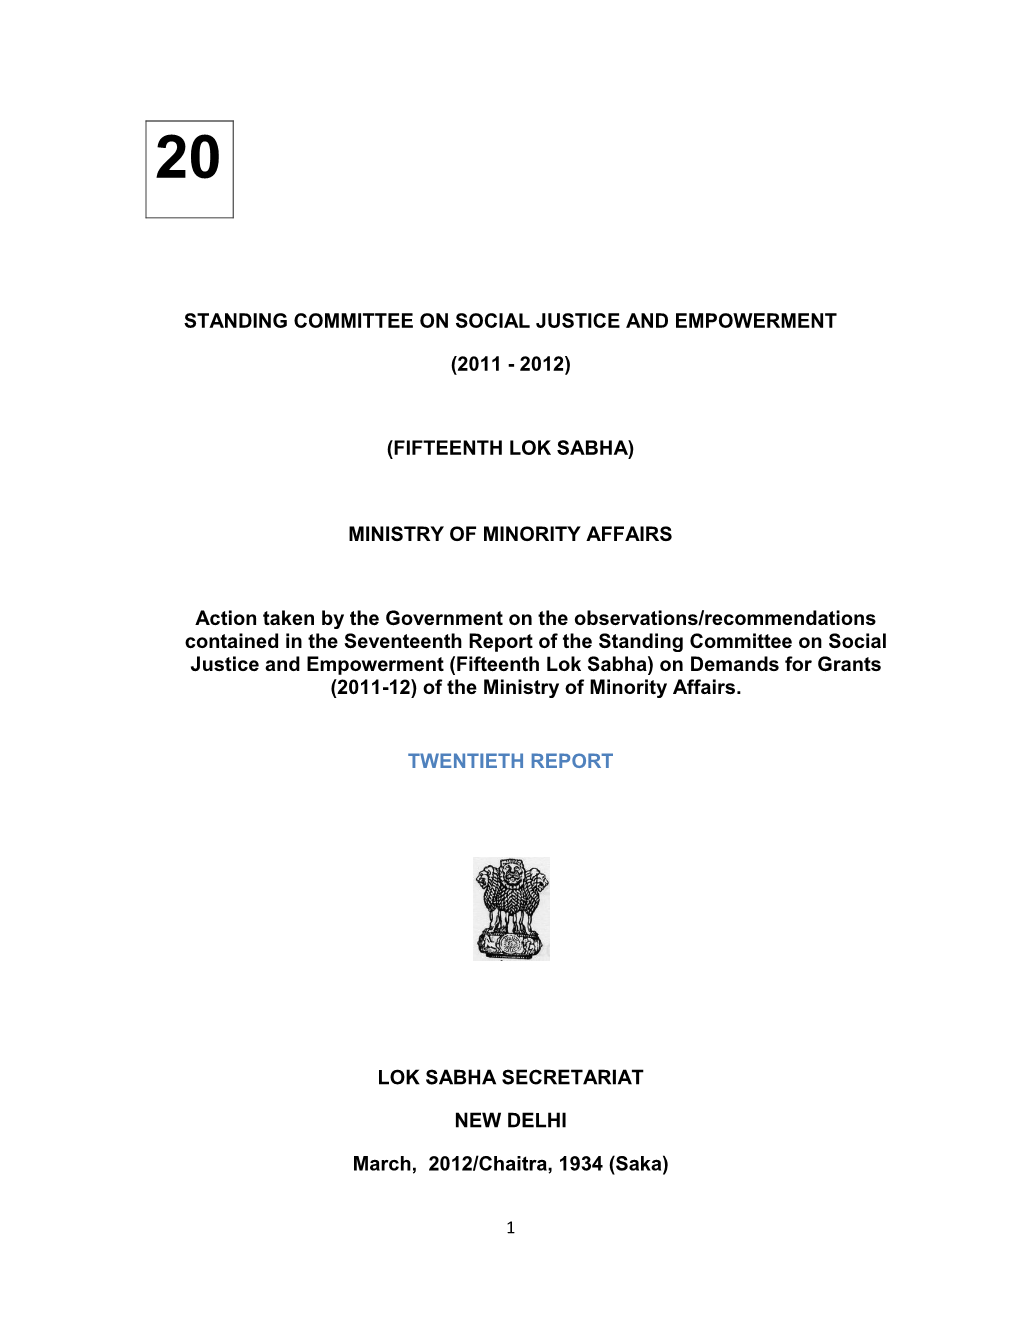 Standing Committee on Social Justice and Empowerment